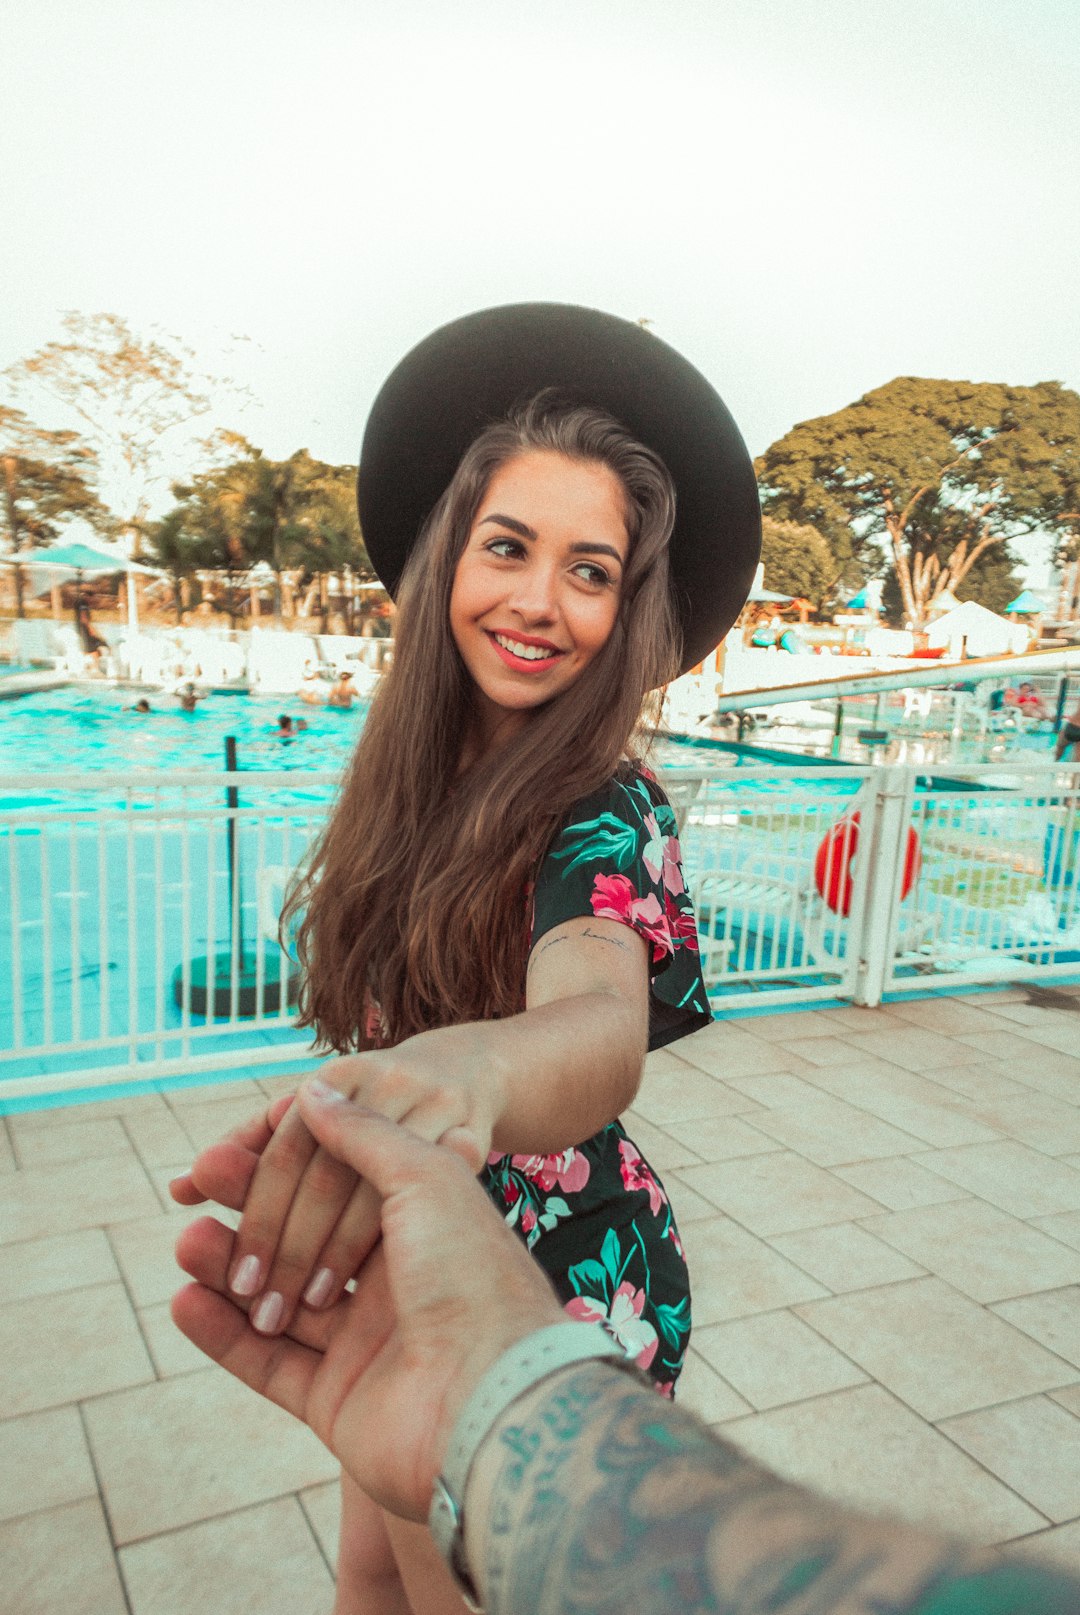 woman standing and smiling while holding hands of another person near swimming pool